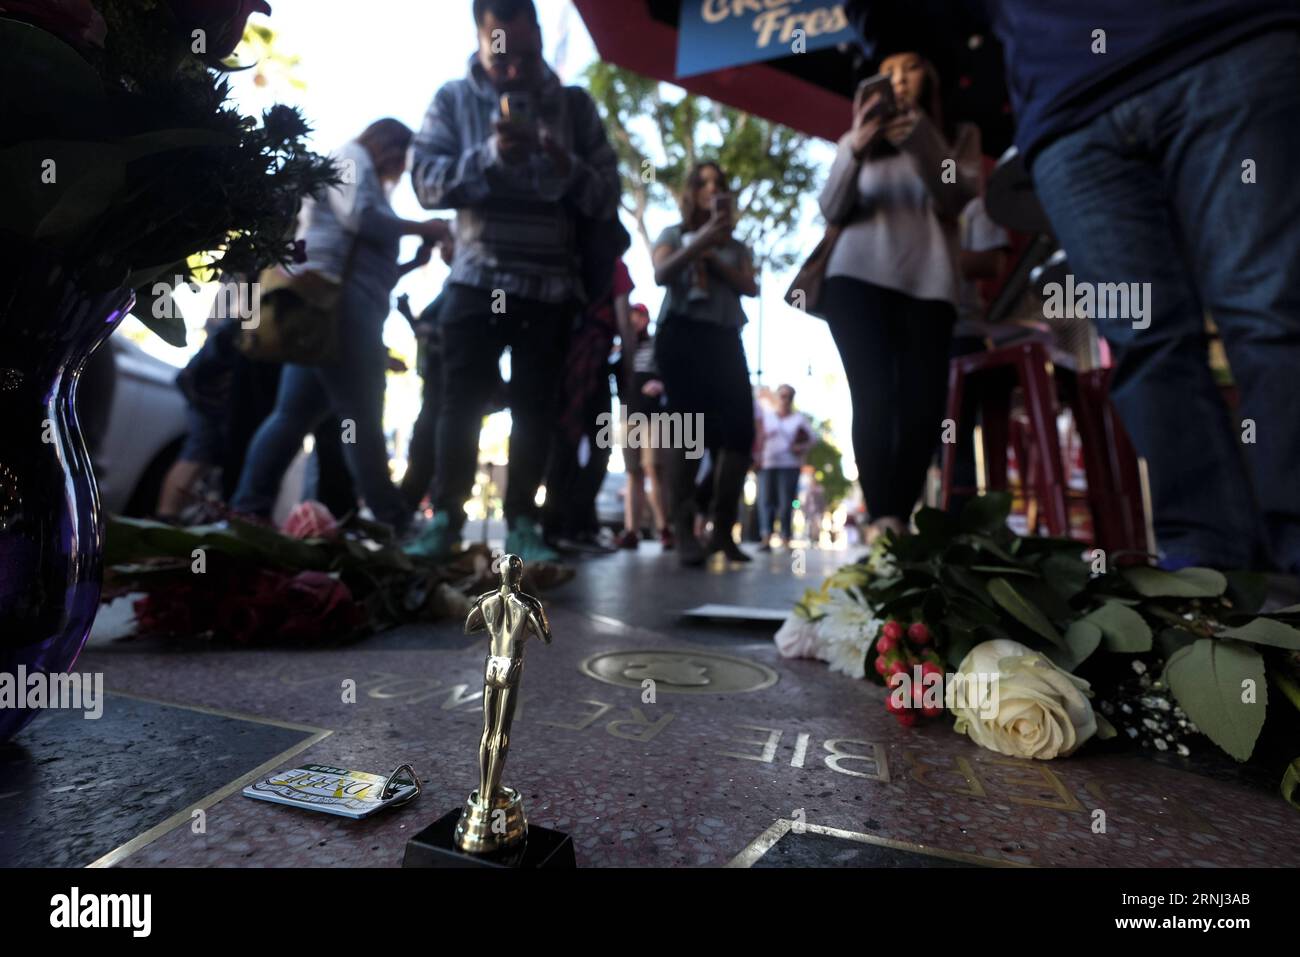 LOS ANGELES, Dec. 29, 2016 -- Flowers surround the Hollywood Walk of Fame star of Debbie Reynolds, in Los Angeles, California, the United States, on Dec. 29, 2016. Hollywood star Debbie Reynolds died of stroke Wednesday at the age of 84, one day after her daughter Carrie Fisher s death. Carrie Fisher, the actress best known as Princess Leia in the Star Wars movie franchise, died at the age of 60 on Tuesday morning, after suffering a heart attack on a flight last Friday. ) (zw) U.S.-LOS ANGELES-DEBBIE REYNOLDS-CARRIE FISHER-WALK OF FAME-CONDOLENCE ZhaoxHanrong PUBLICATIONxNOTxINxCHN   Los Angel Stock Photo